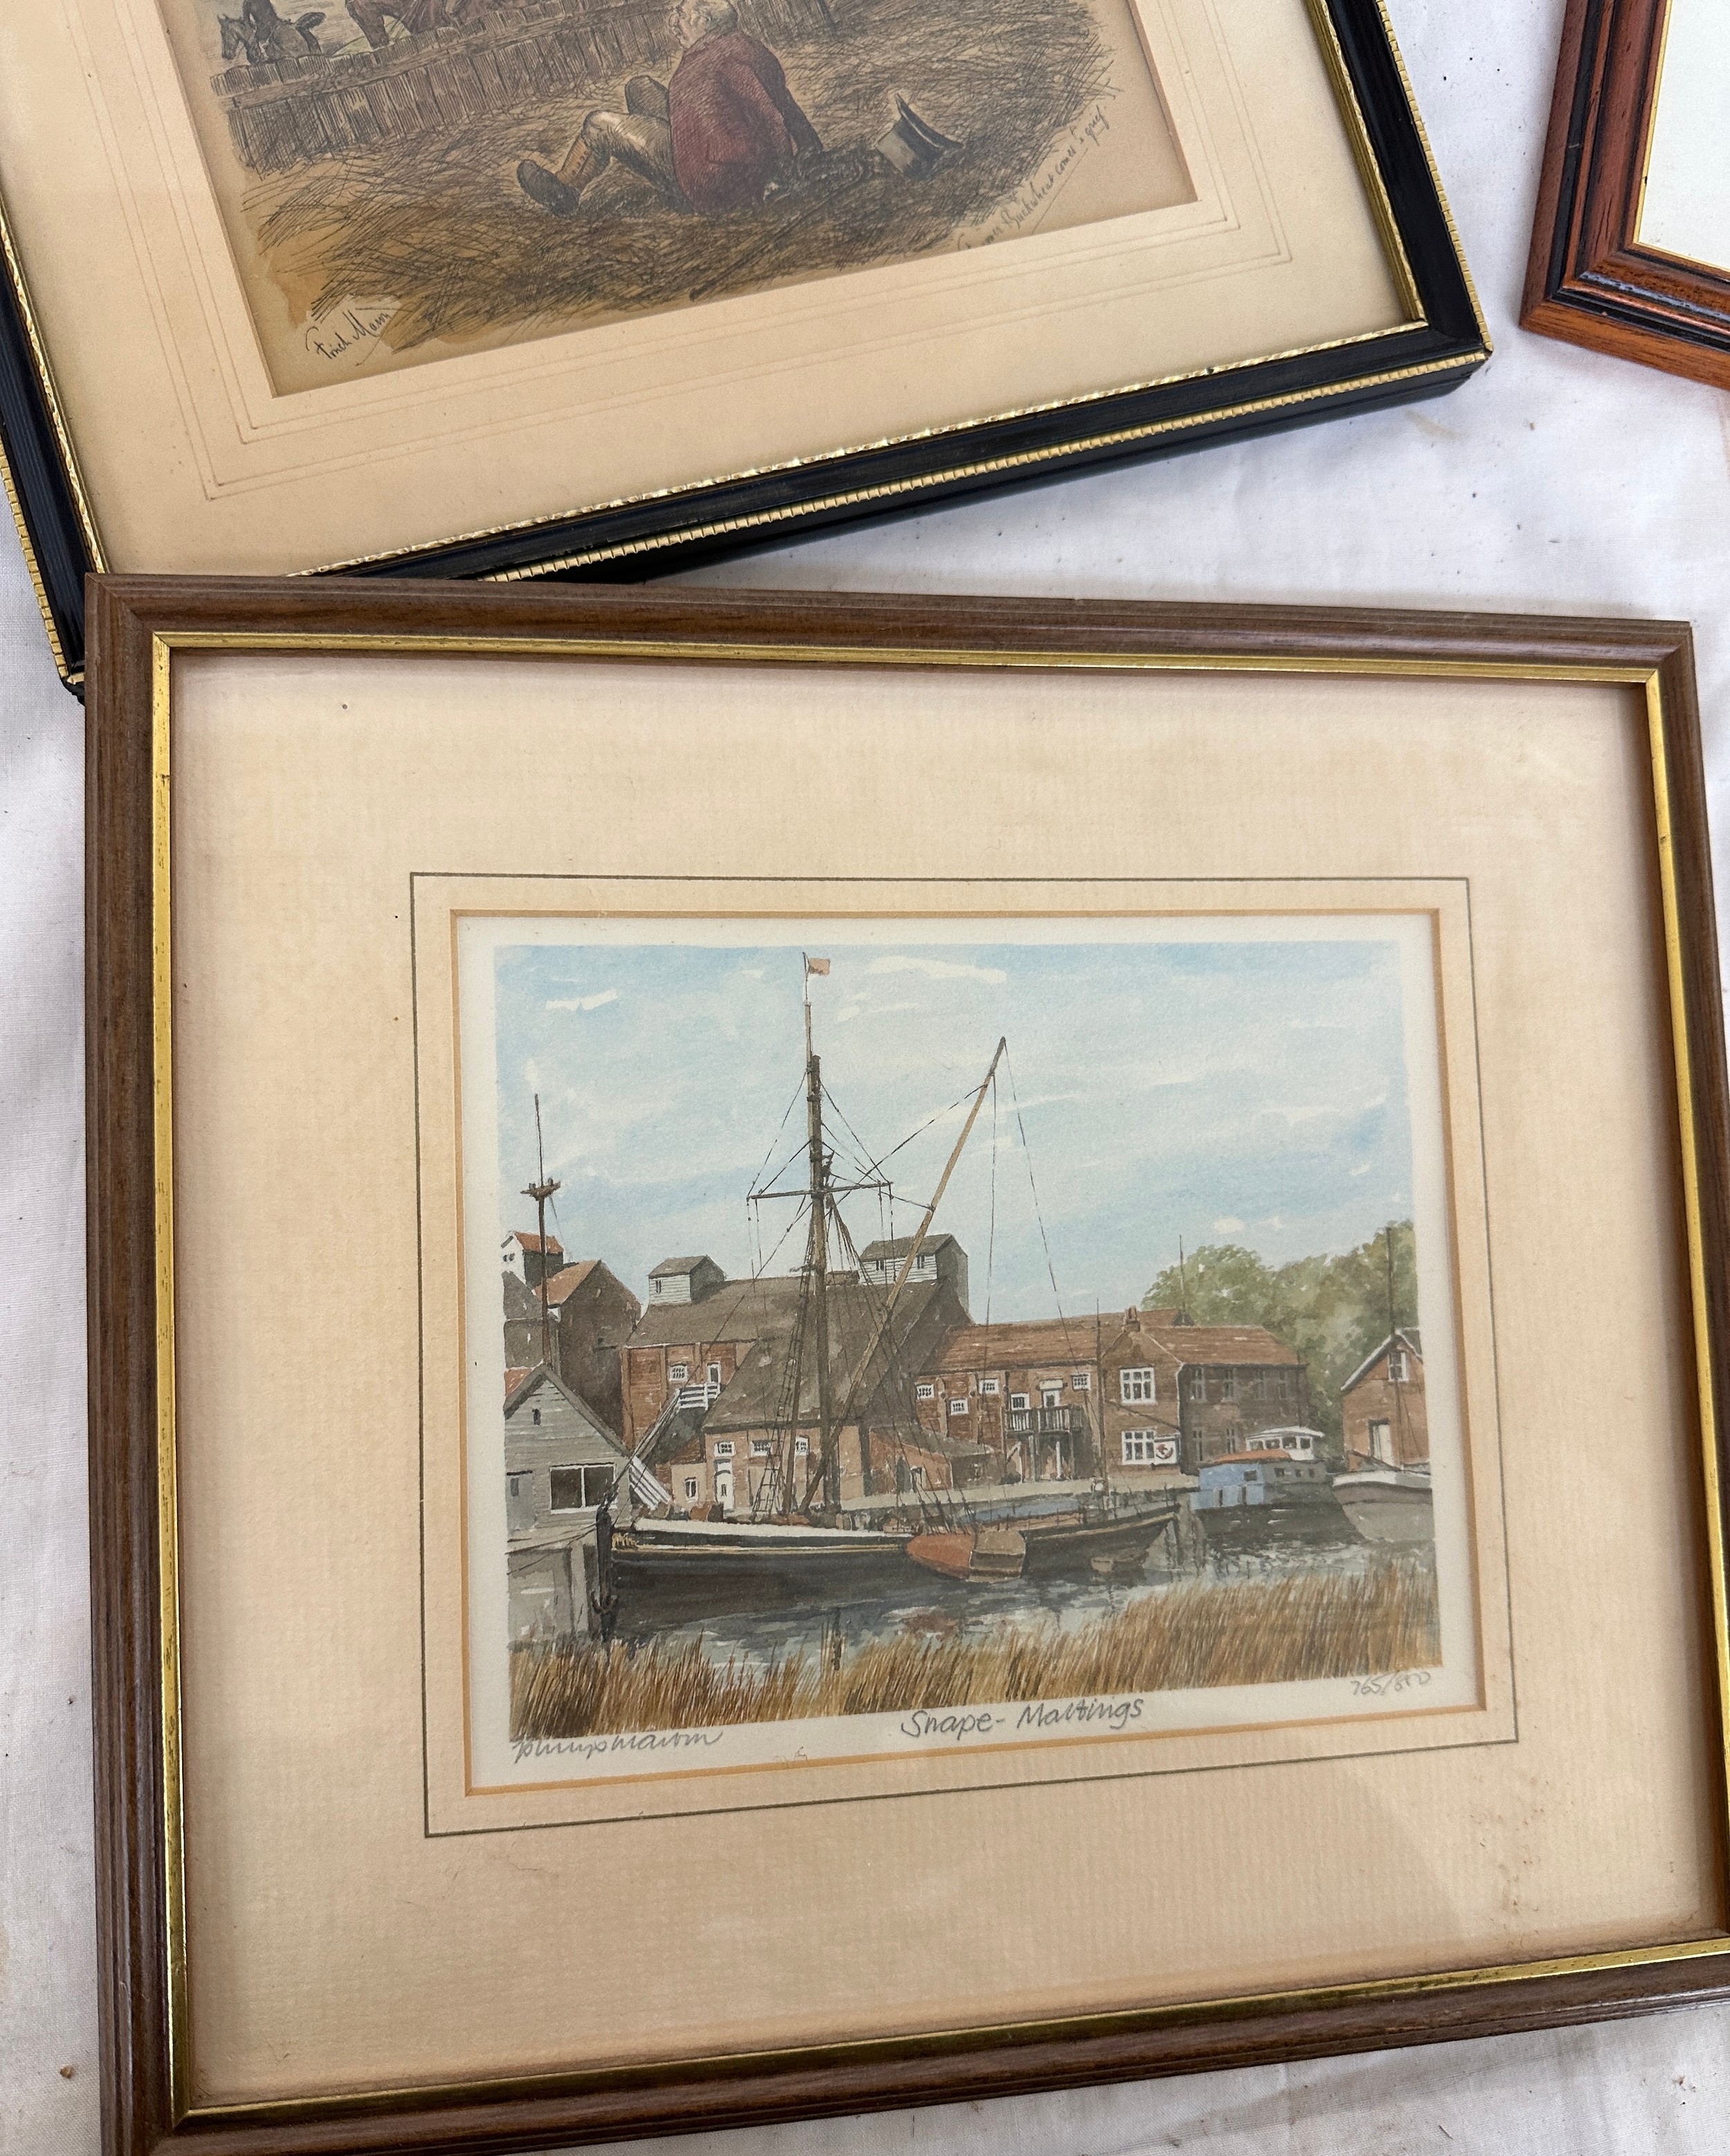 Framed prints by Shirley Carnt, Signed watercolour by Melvyn R J Brinkley, Watercolour by John - Image 5 of 8